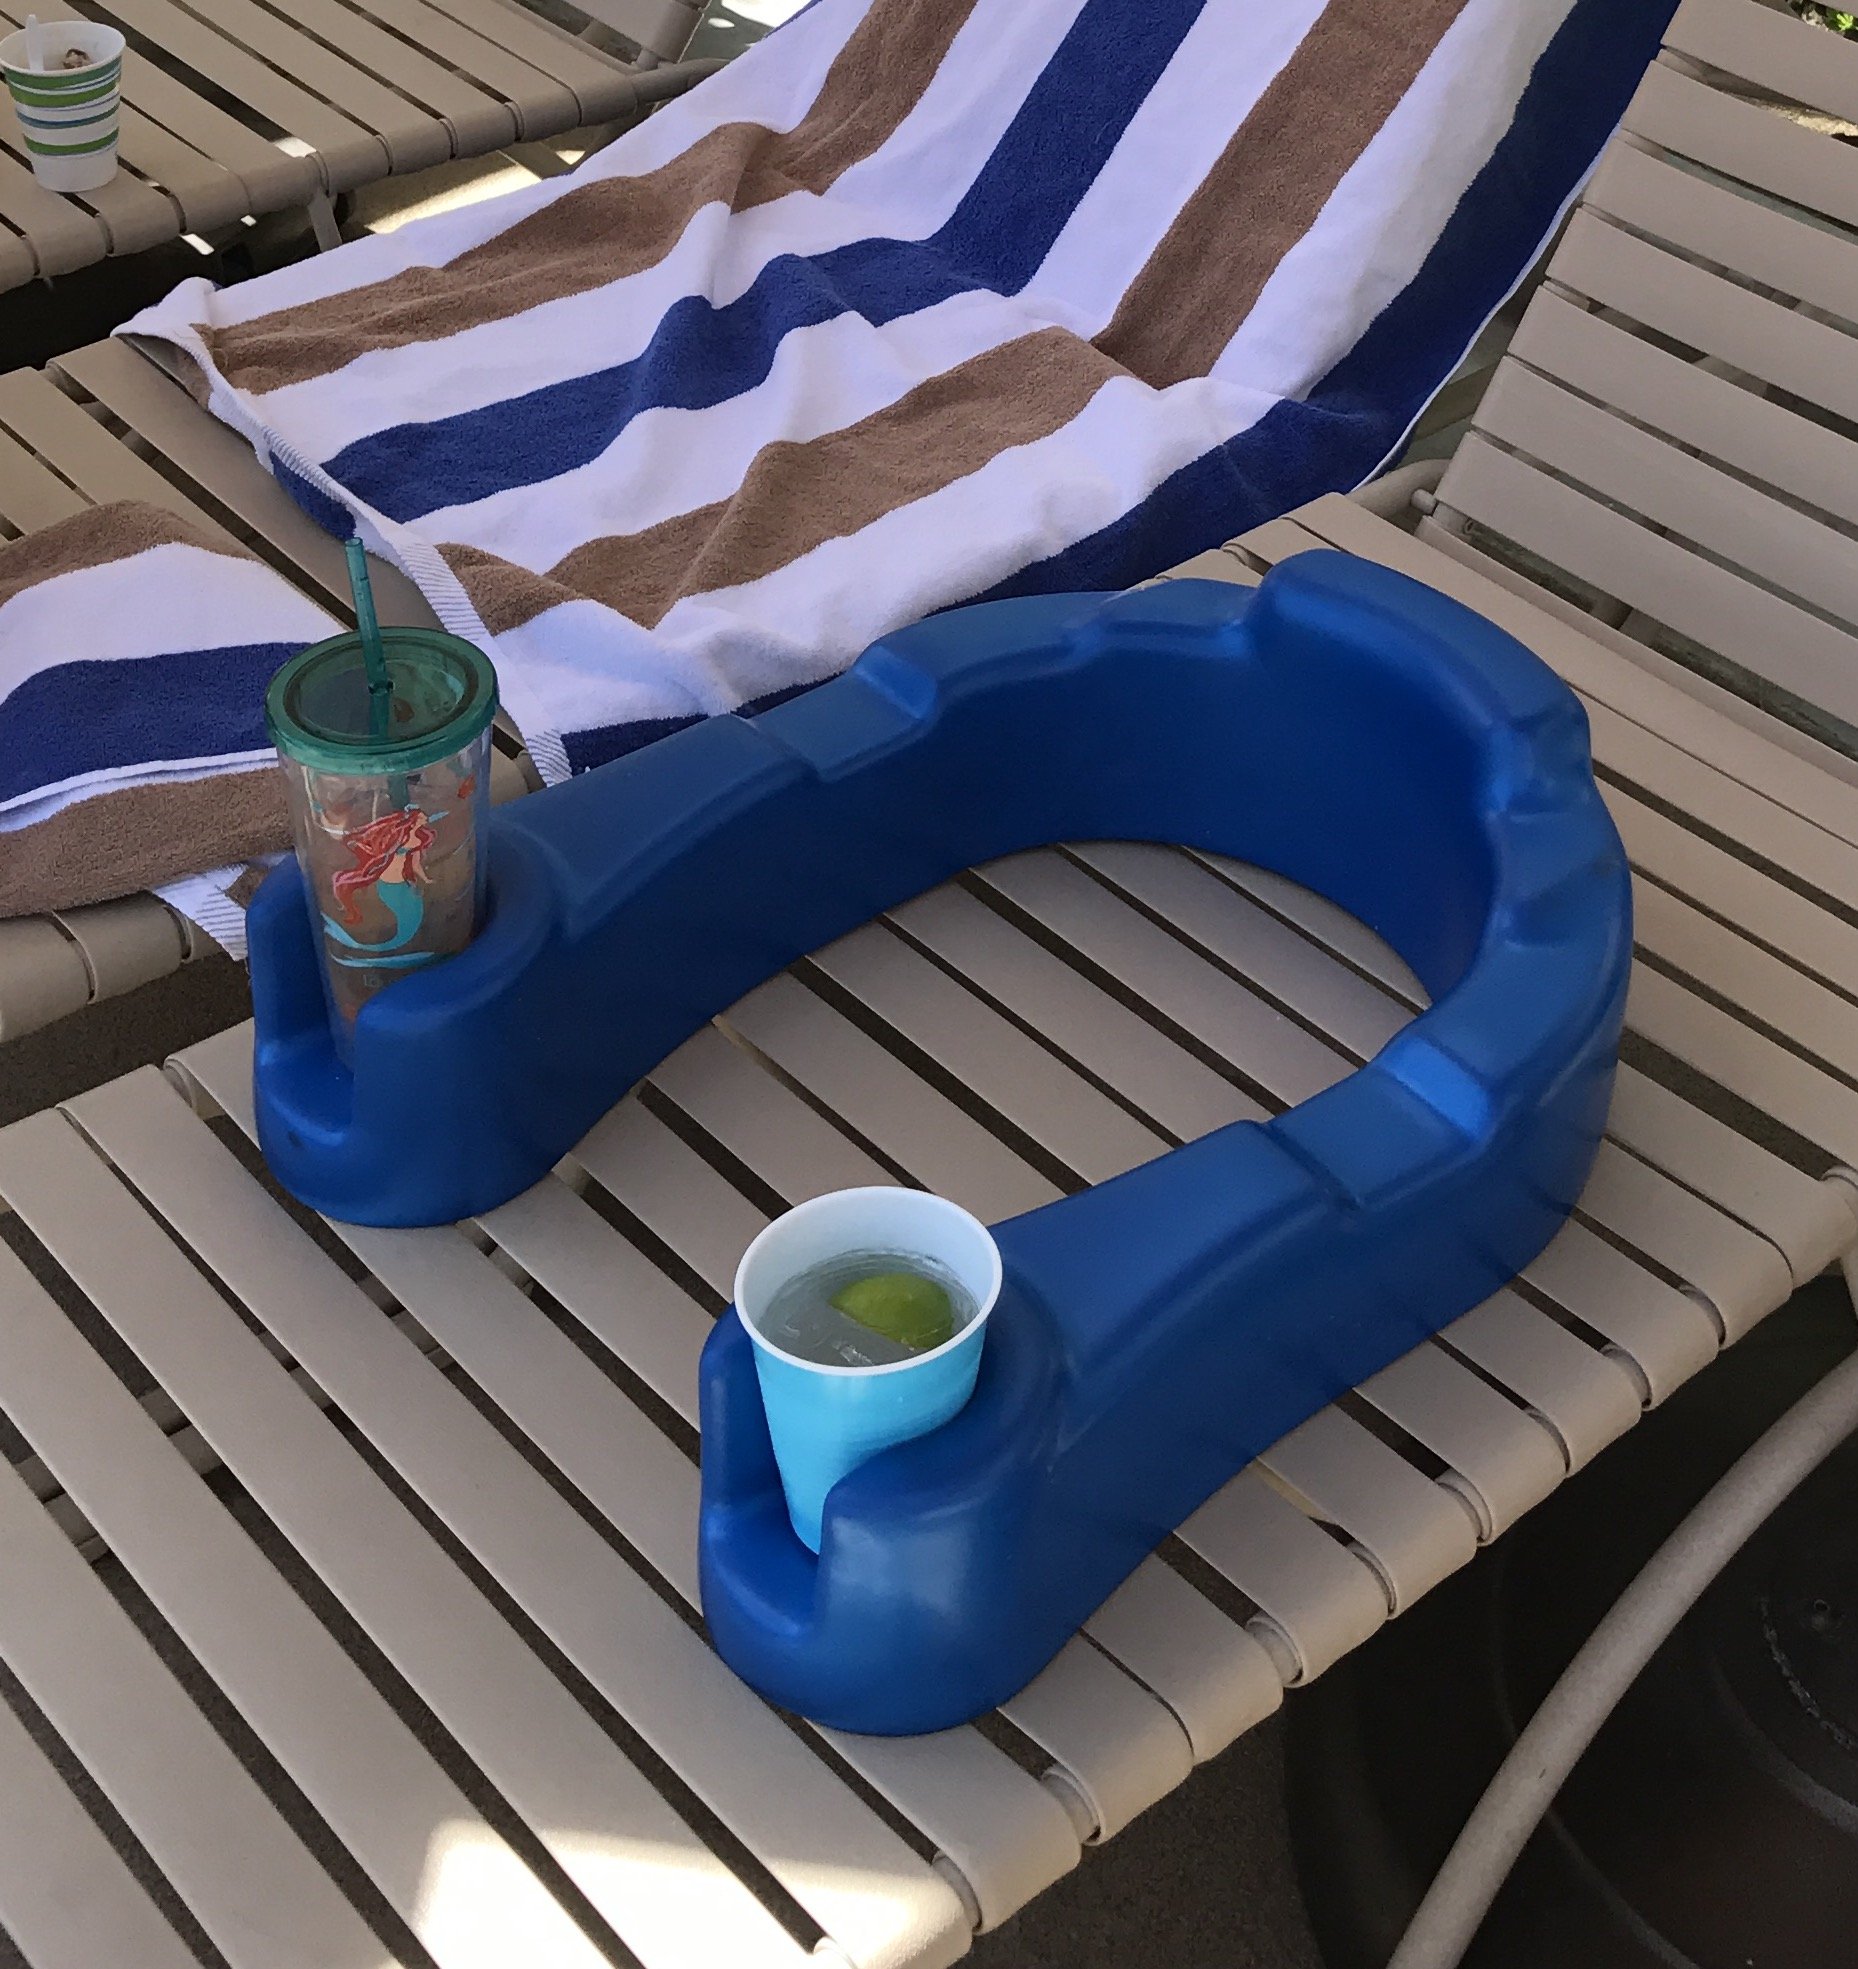 Float’n Thang Luxury Pool Floating Device, Boating and Paddle Board Accessory - Perfect for Lounging in The Swimming Pool/Lake/Beach, Zero Gravity